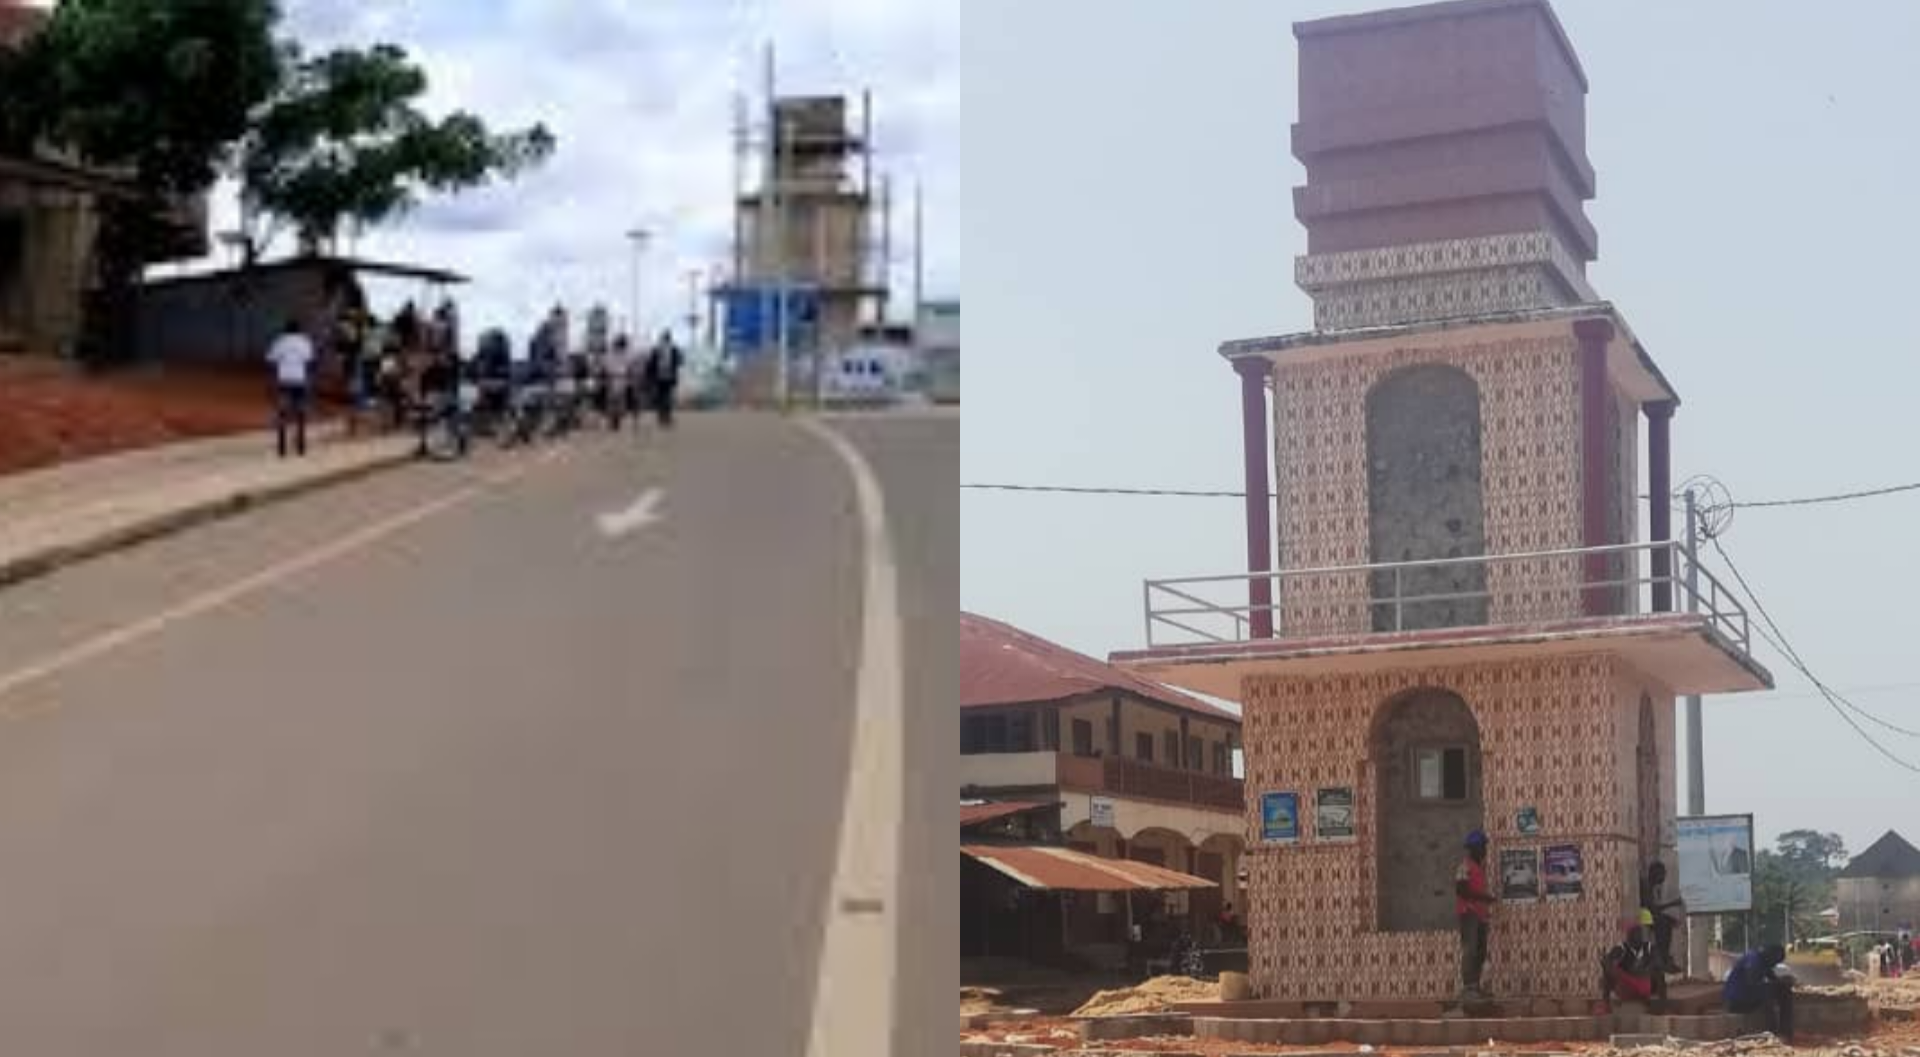 Kailahun District Council Suspends Clock Tower Reconstruction Over Low Tax Compliance